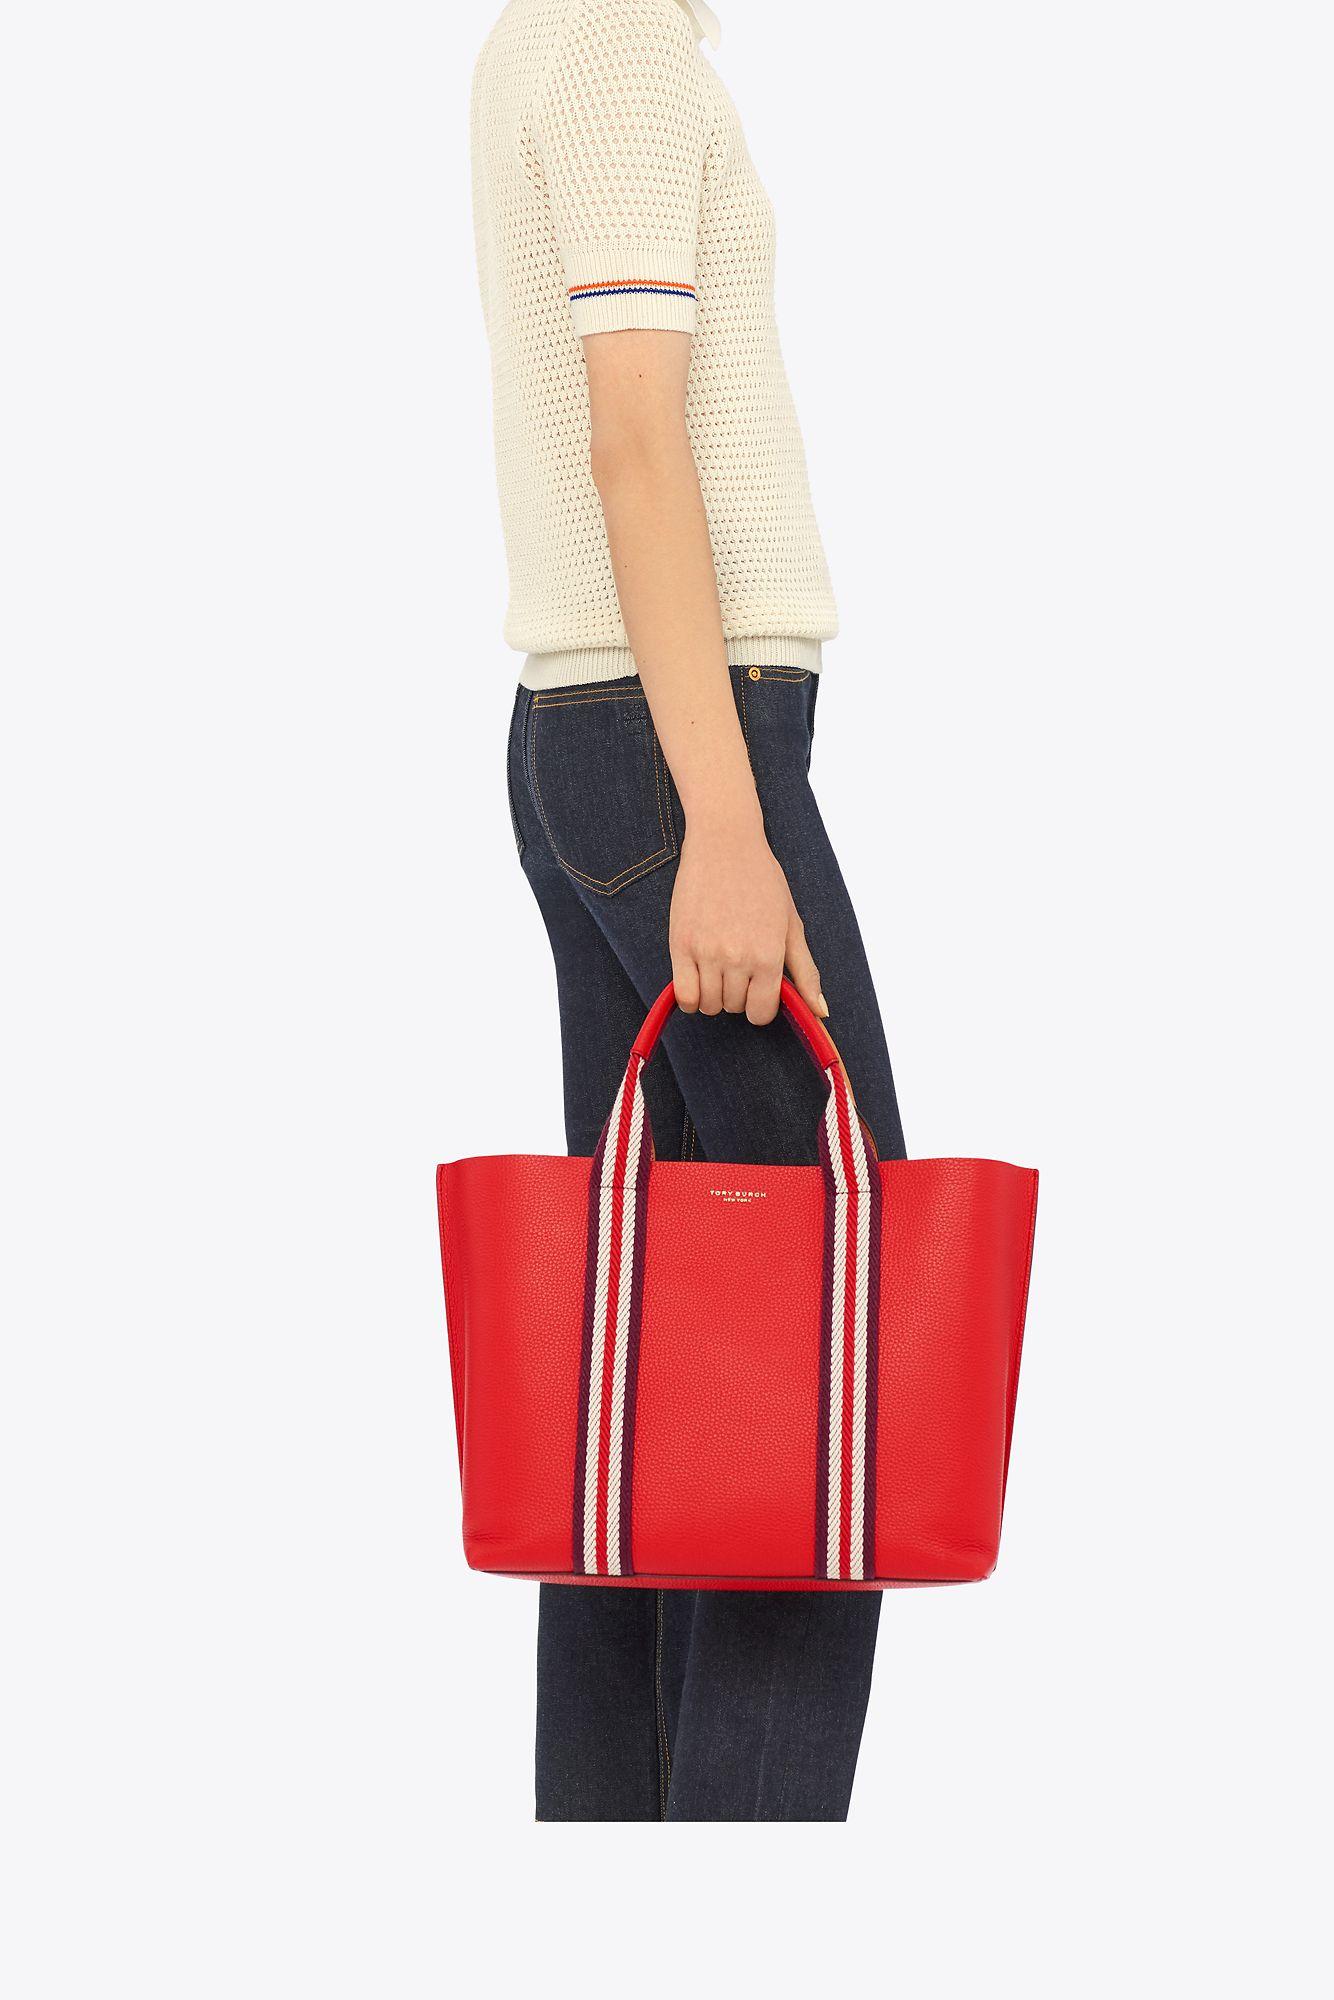 Introducir 54+ imagen tory burch perry tote red - Abzlocal.mx